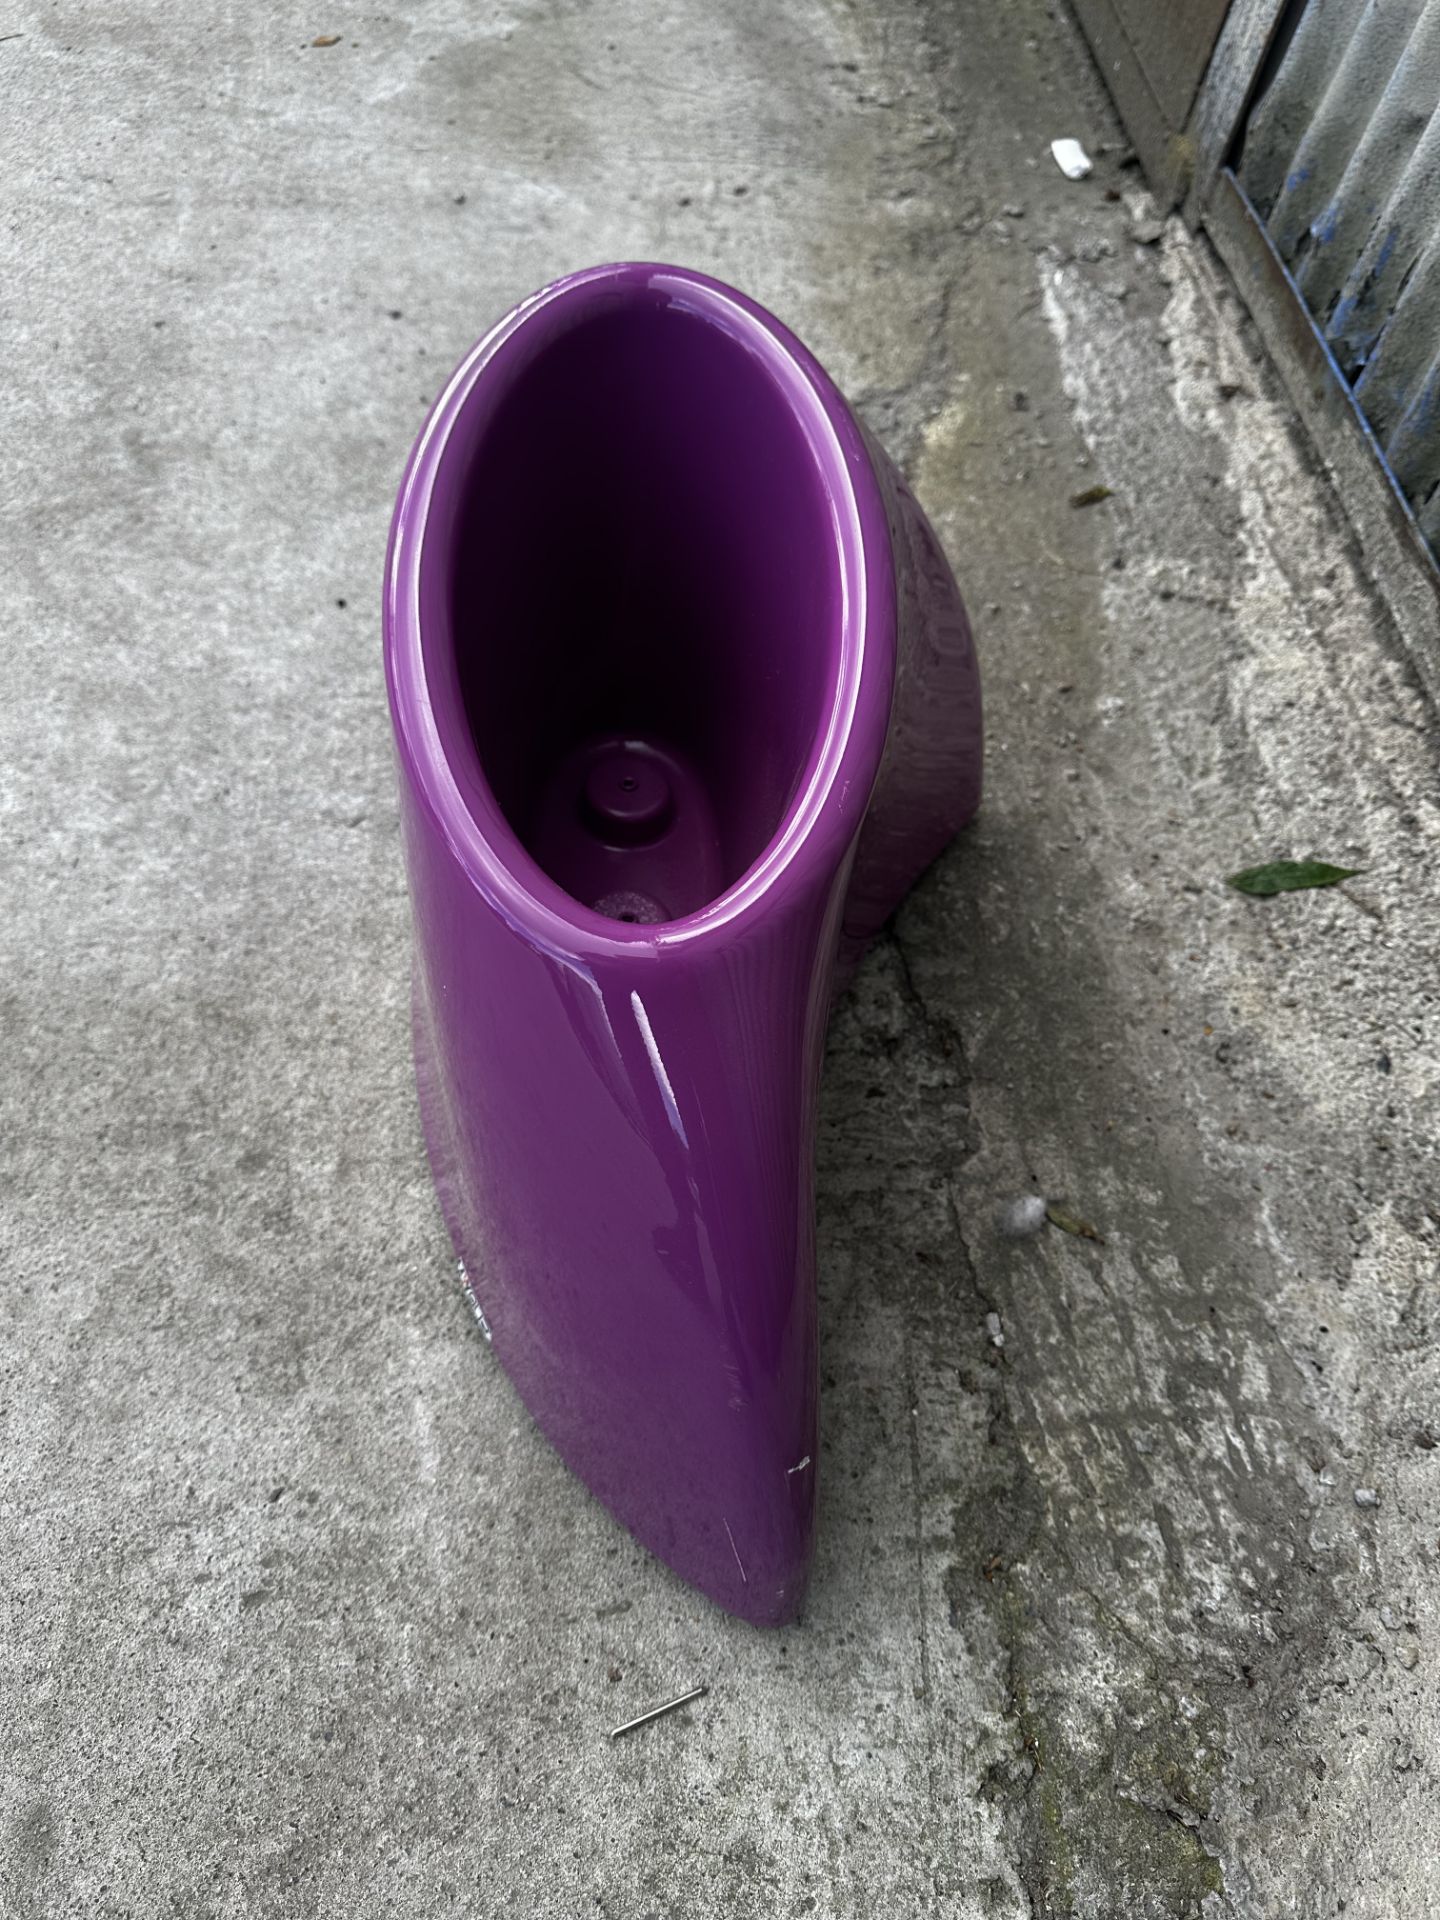 Tao S Flowerpot Glass Plastic Material Purple - MyYour - Used - Approx. RRP £150 - Image 3 of 3